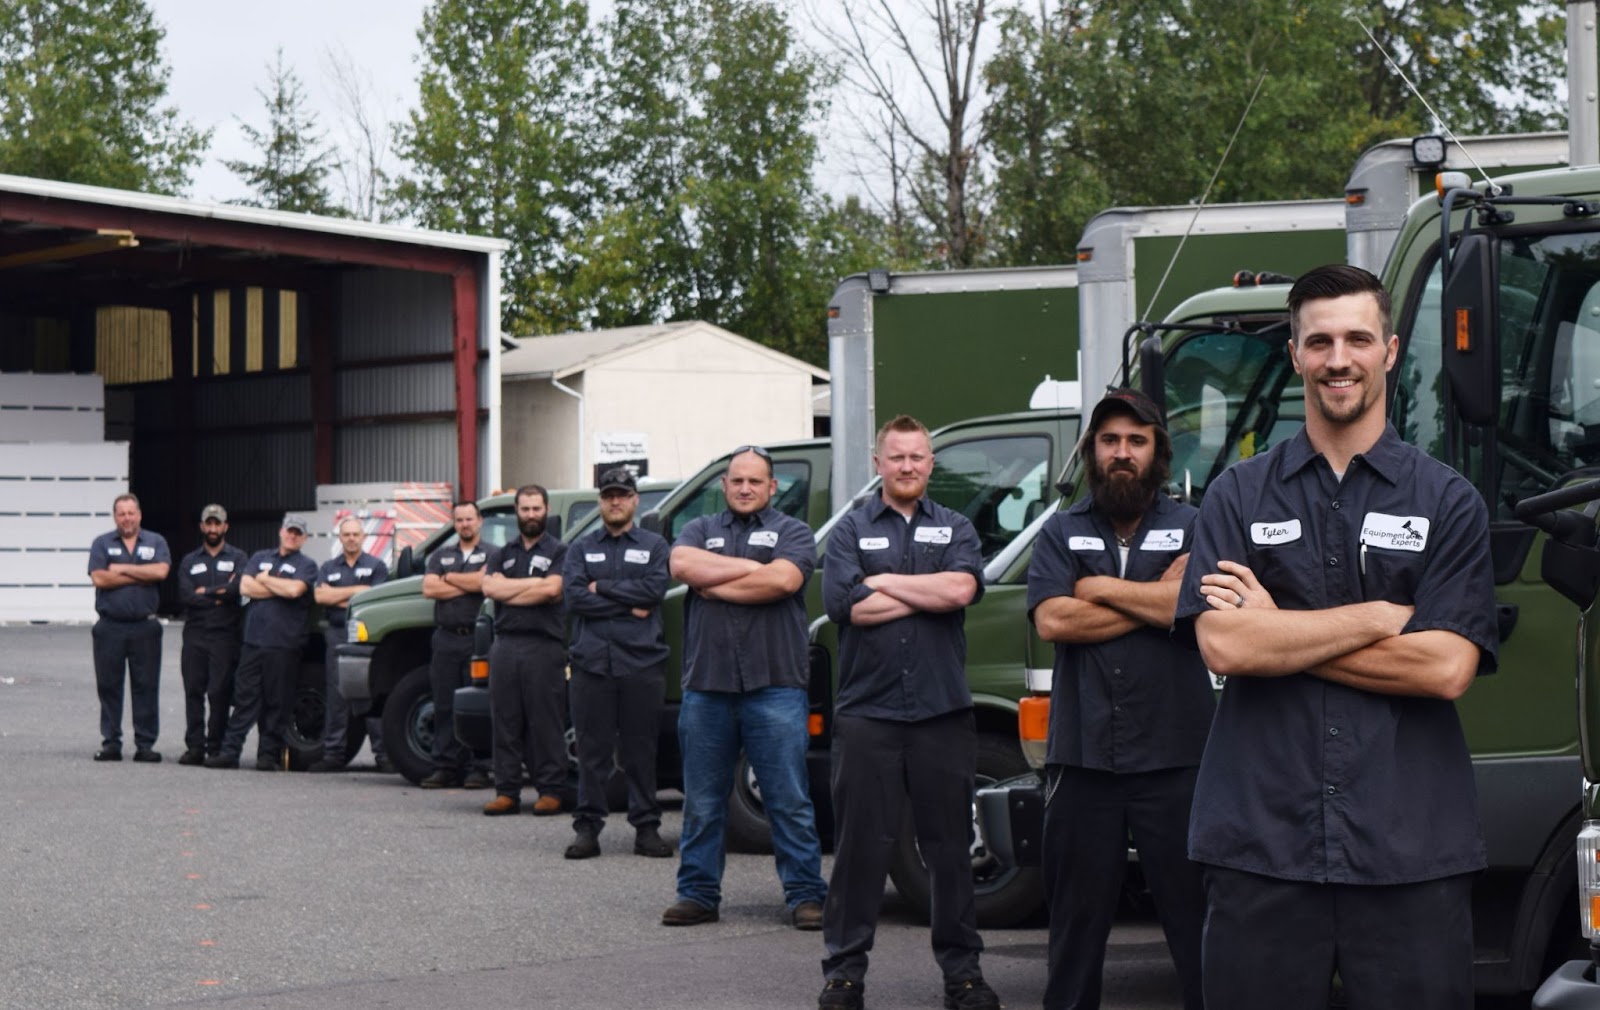 Equipment Experts mechanics all lined up with their arms crossed and in front of fleet vehicles